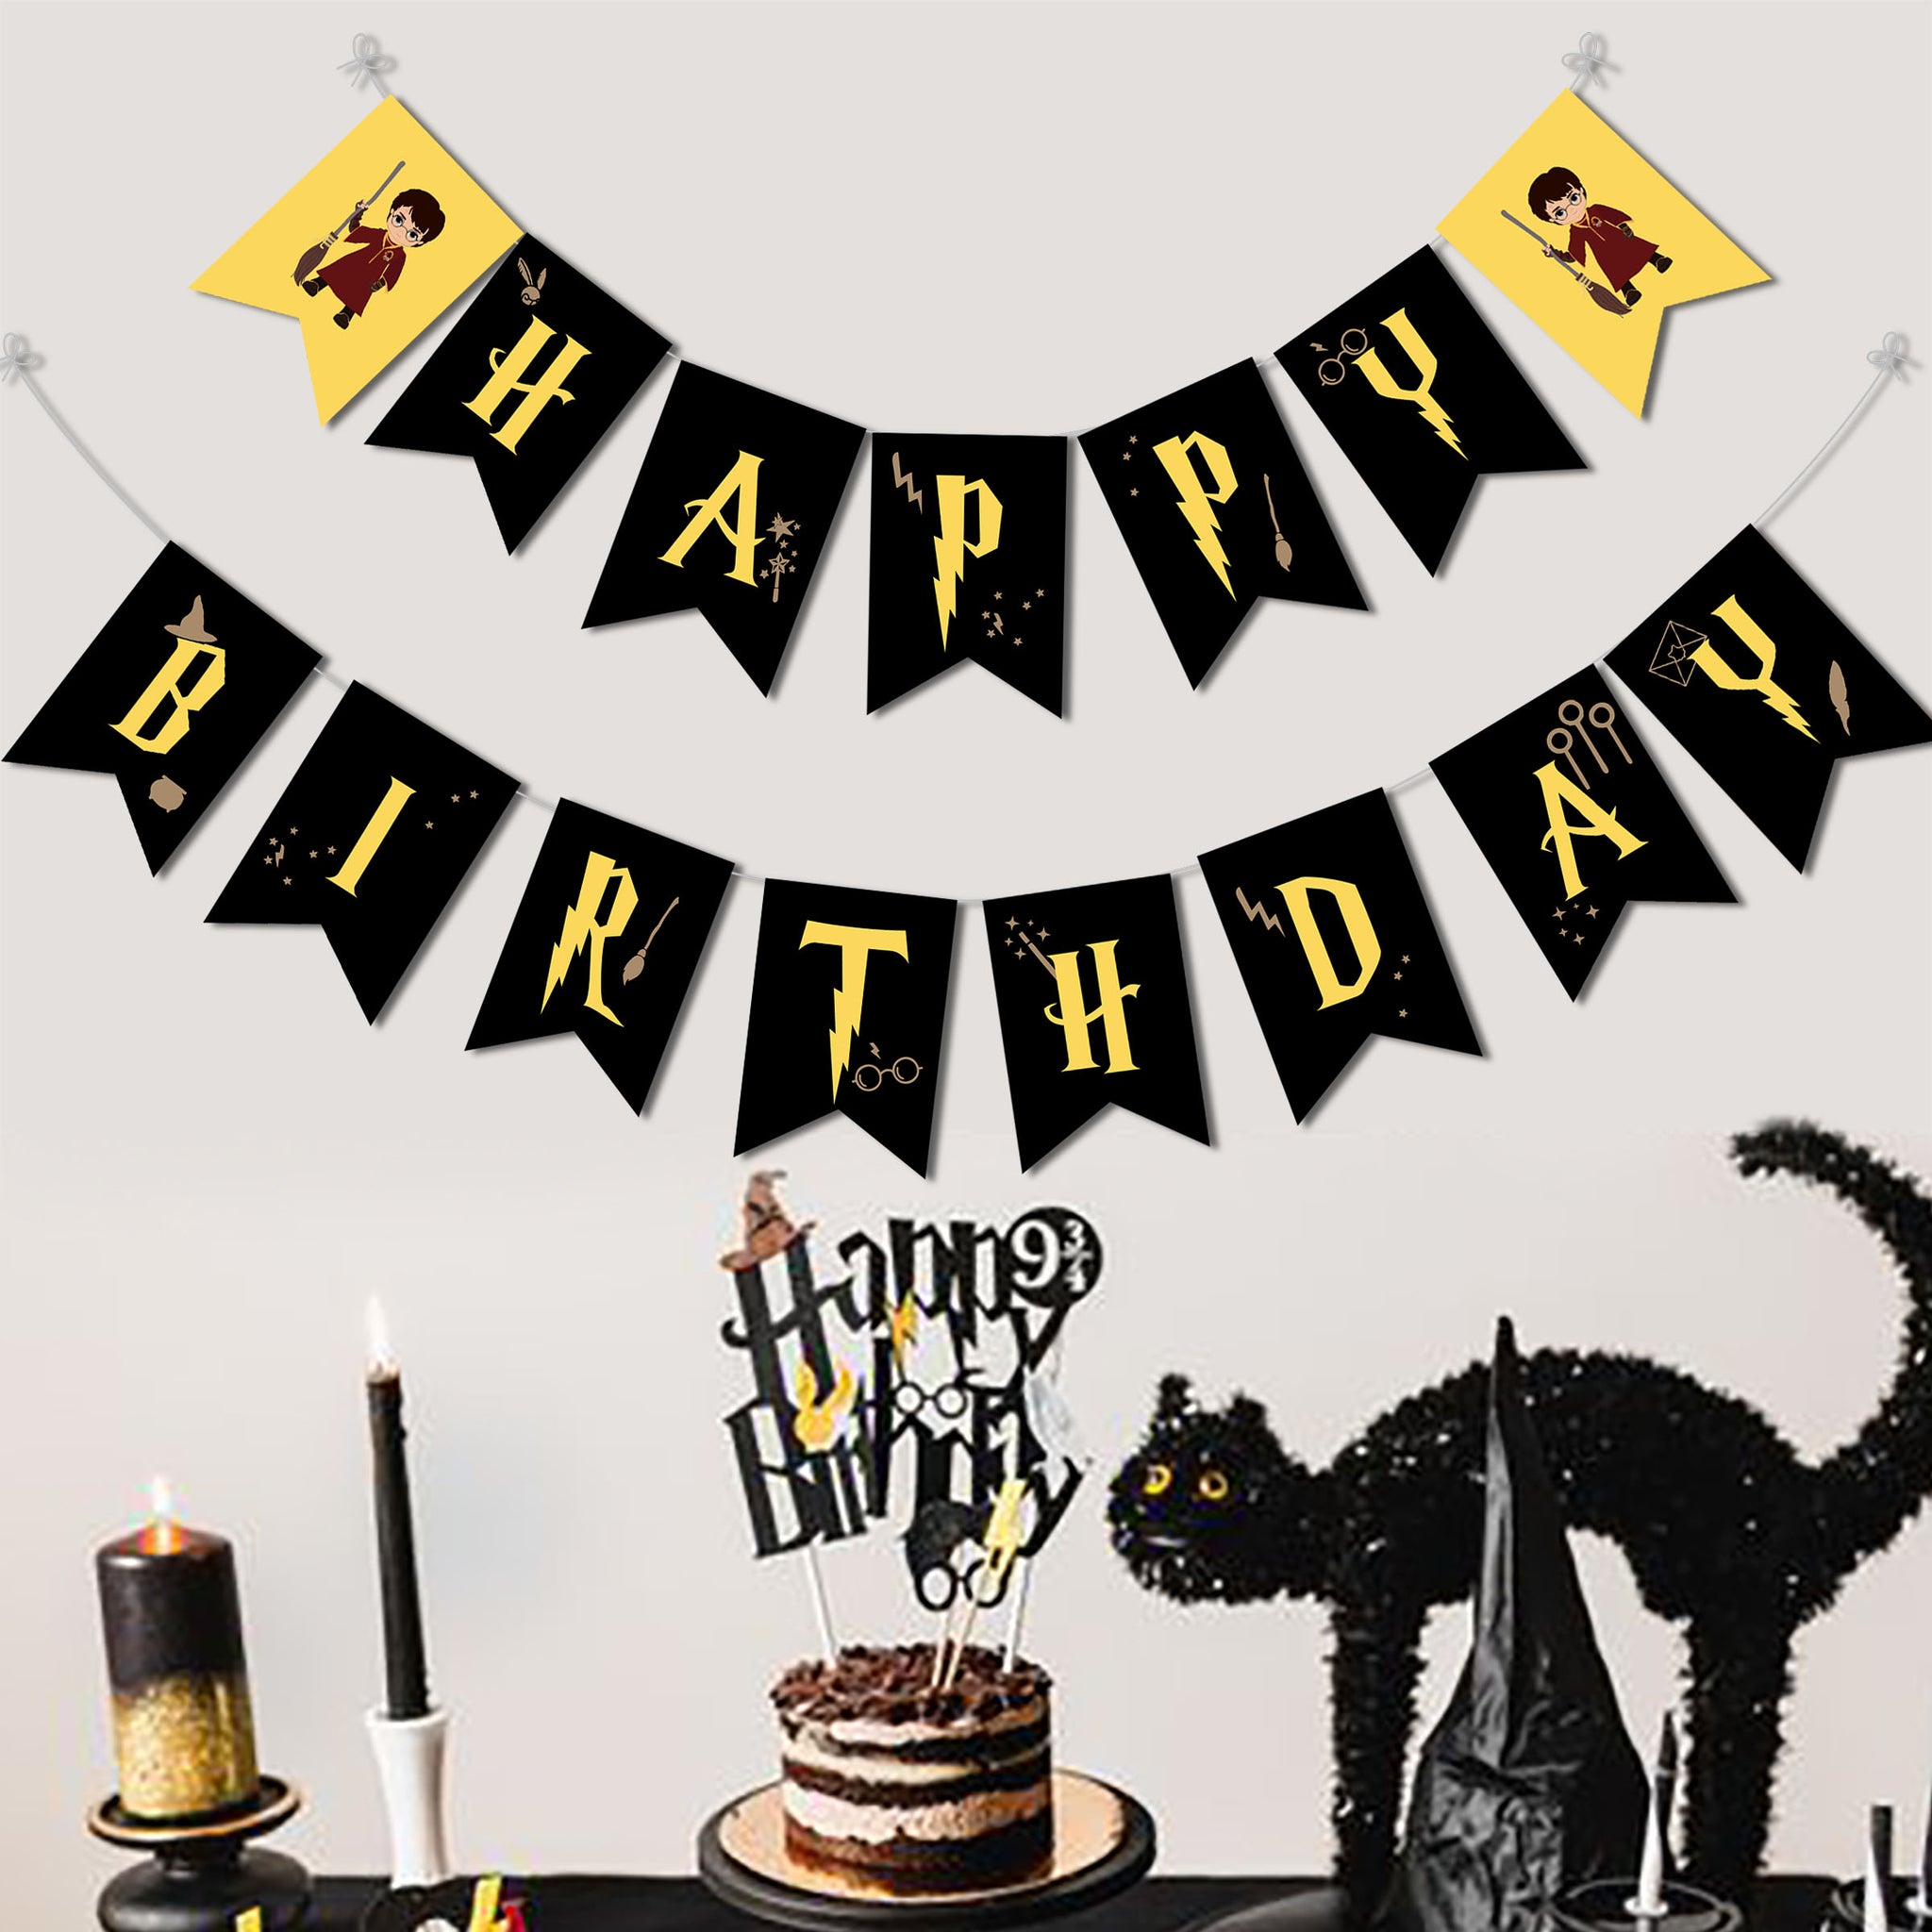 Harry potter birthday party • Compare best prices »